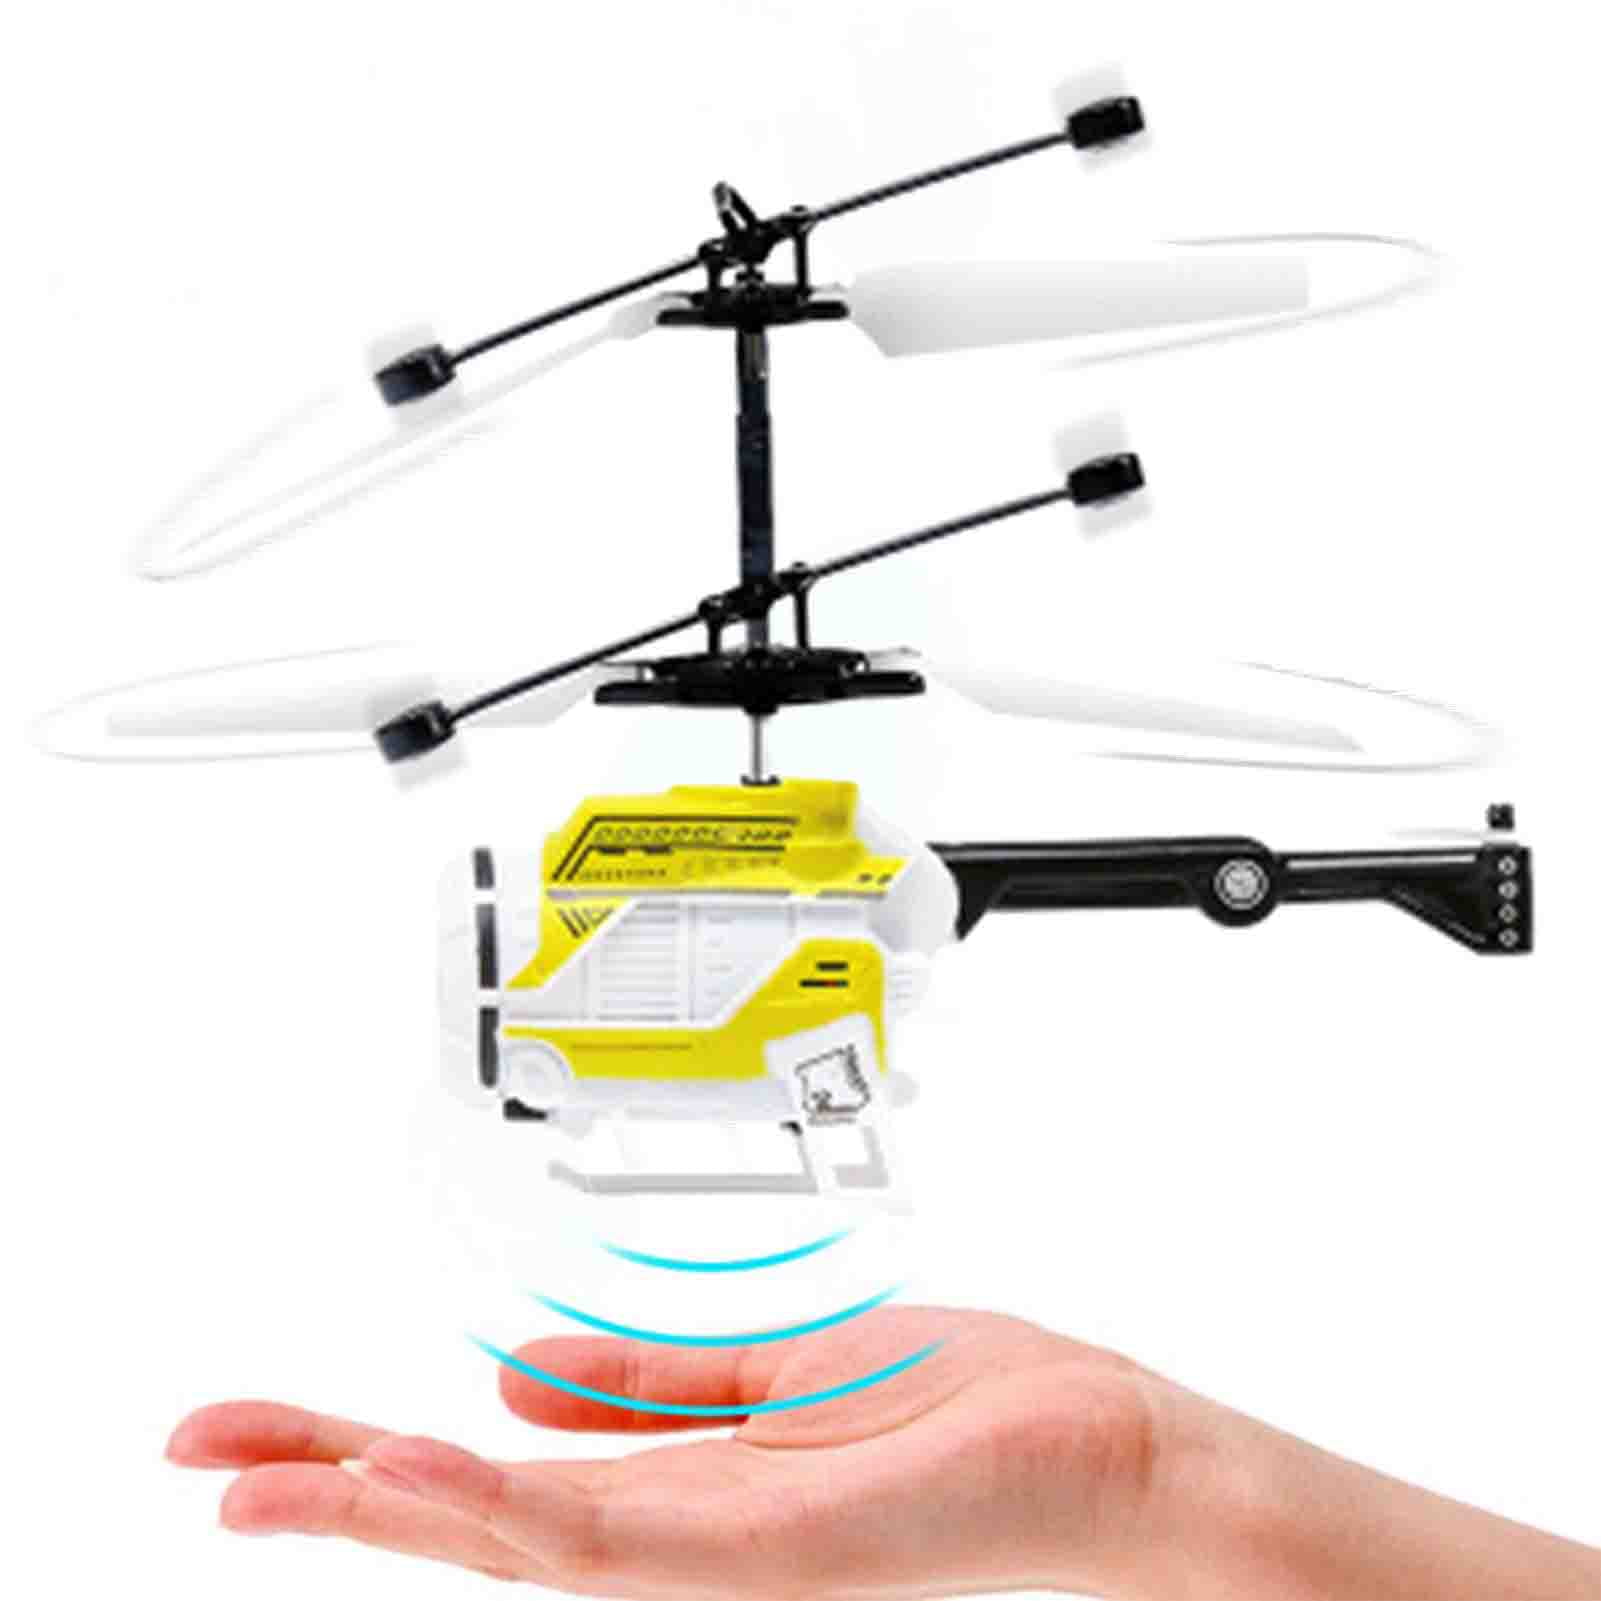 Details about   Drone for Kids with Remote Control Mini RC Drone with 2 Speed Models New Hit 